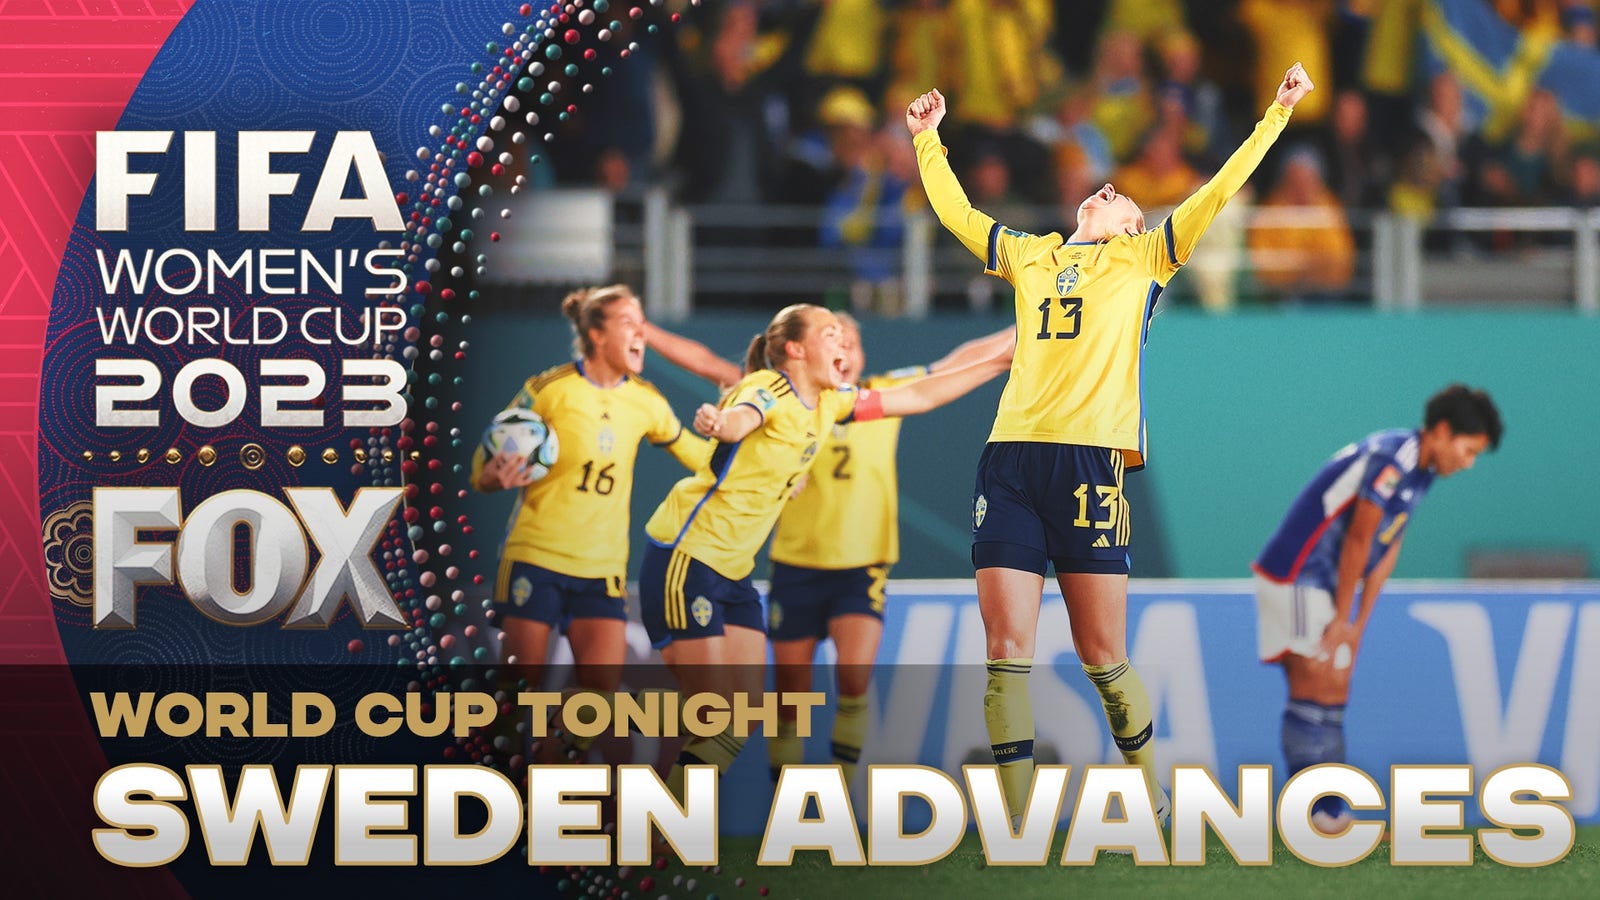 Sweden defeats Japan to advance to the World Cup semifinals | World Cup Tonight